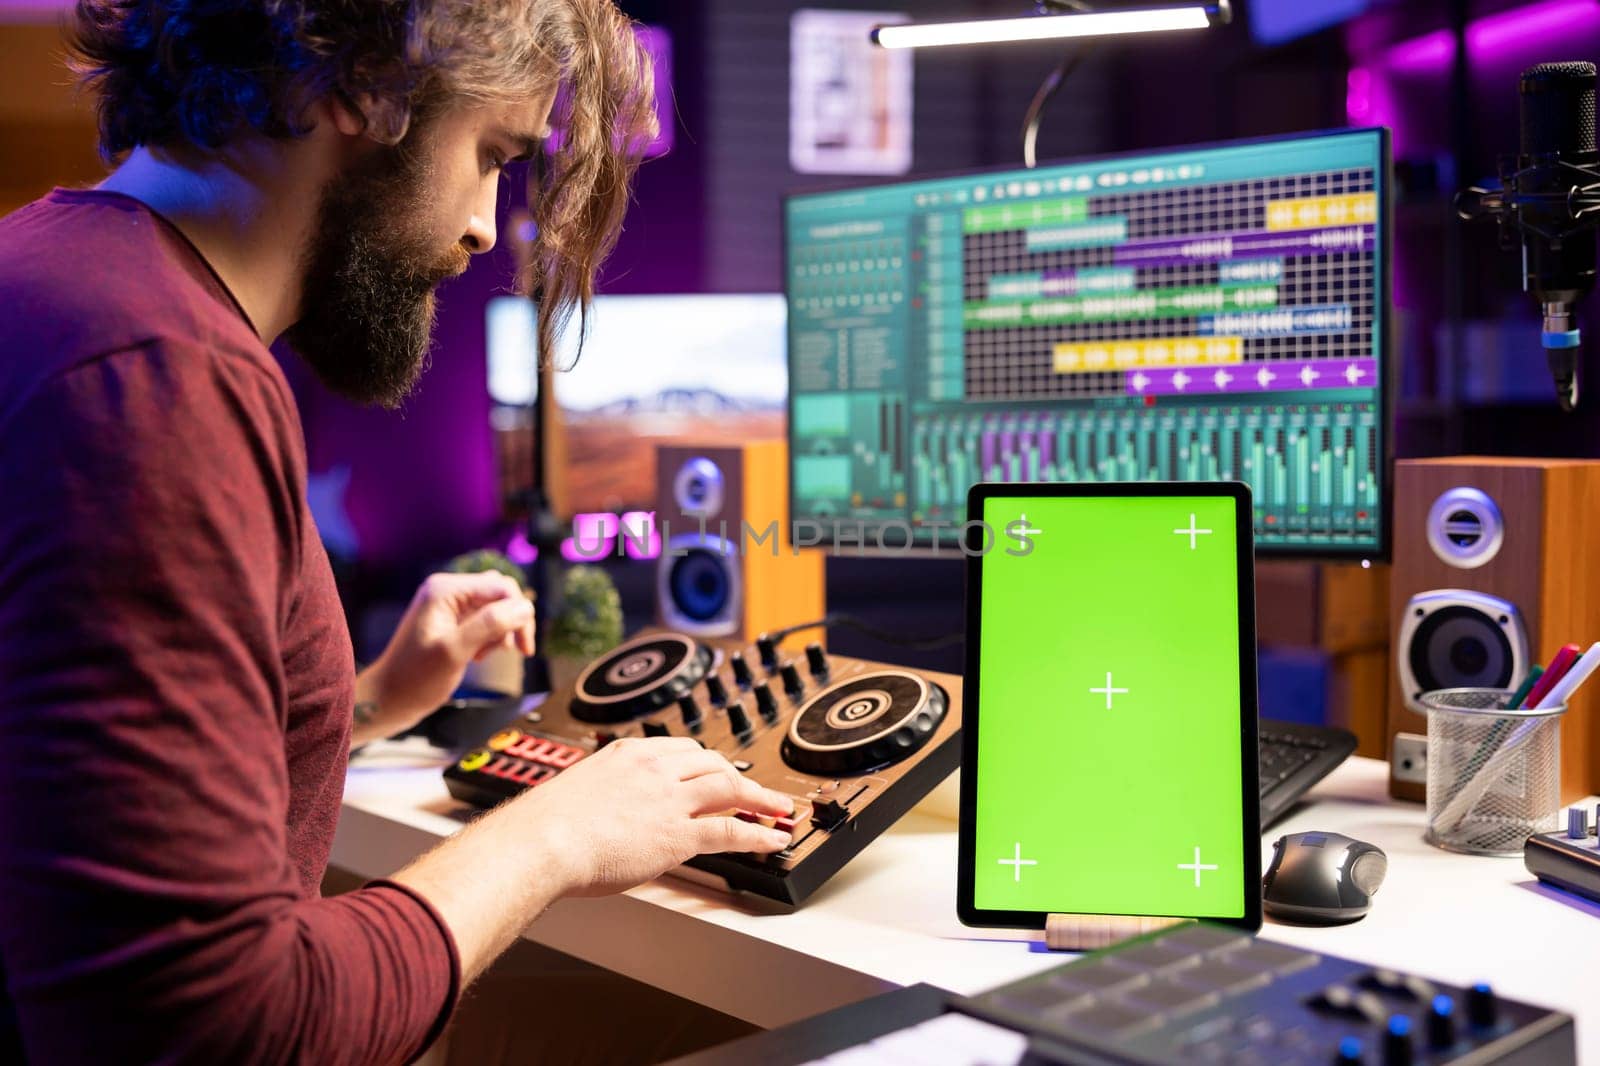 Composer creating soundtracks on stereo gear and greenscreen display by DCStudio